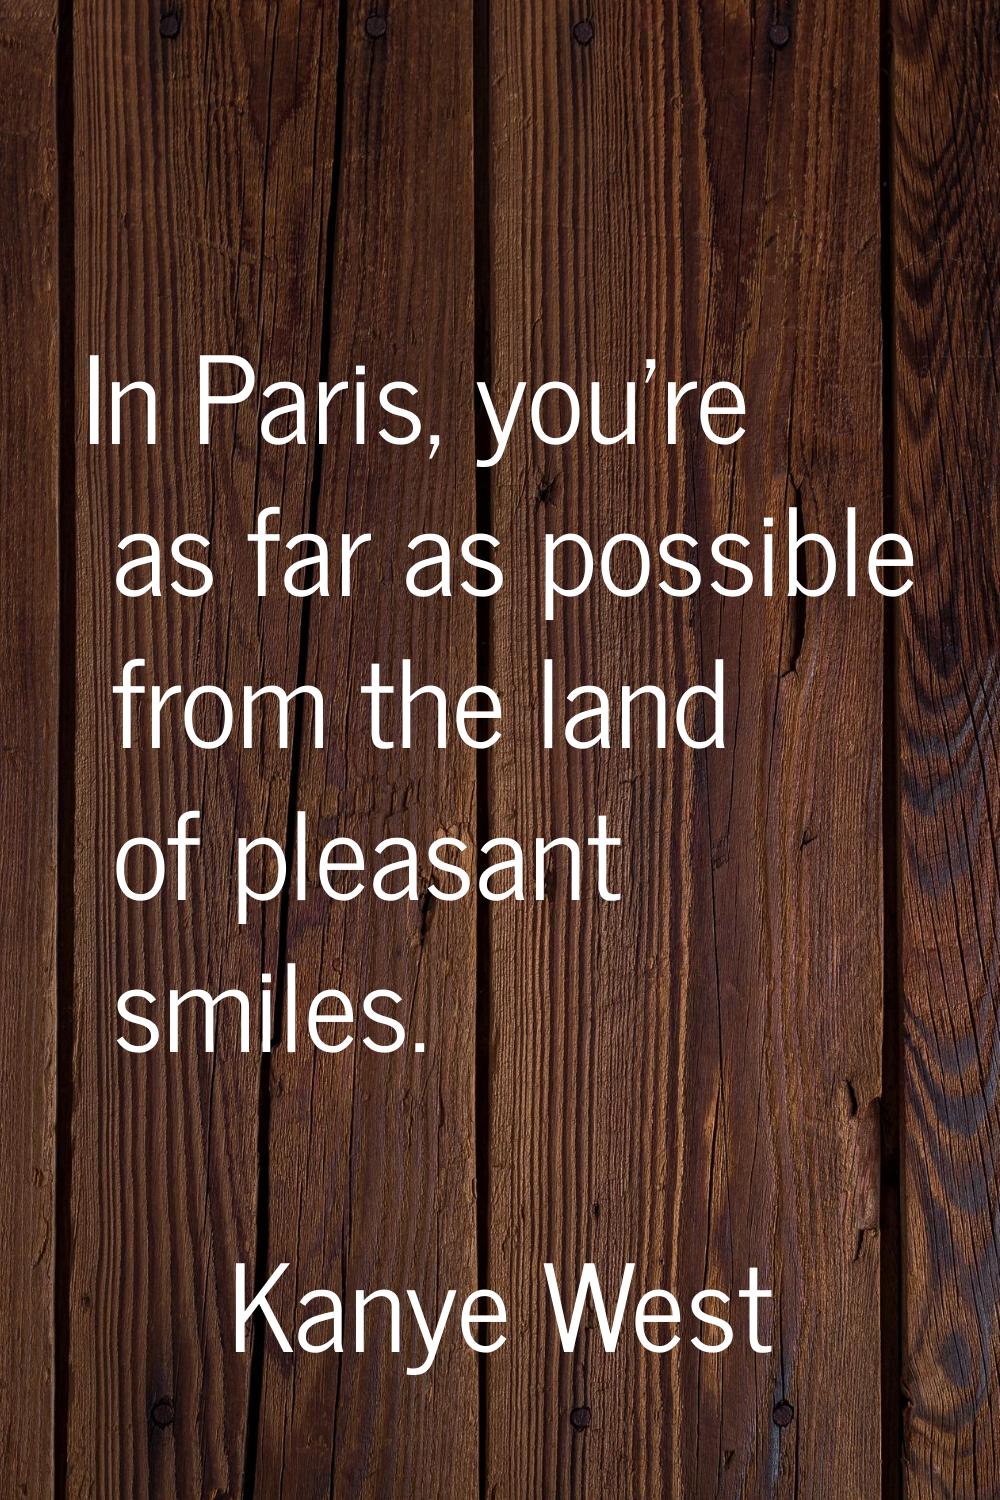 In Paris, you're as far as possible from the land of pleasant smiles.